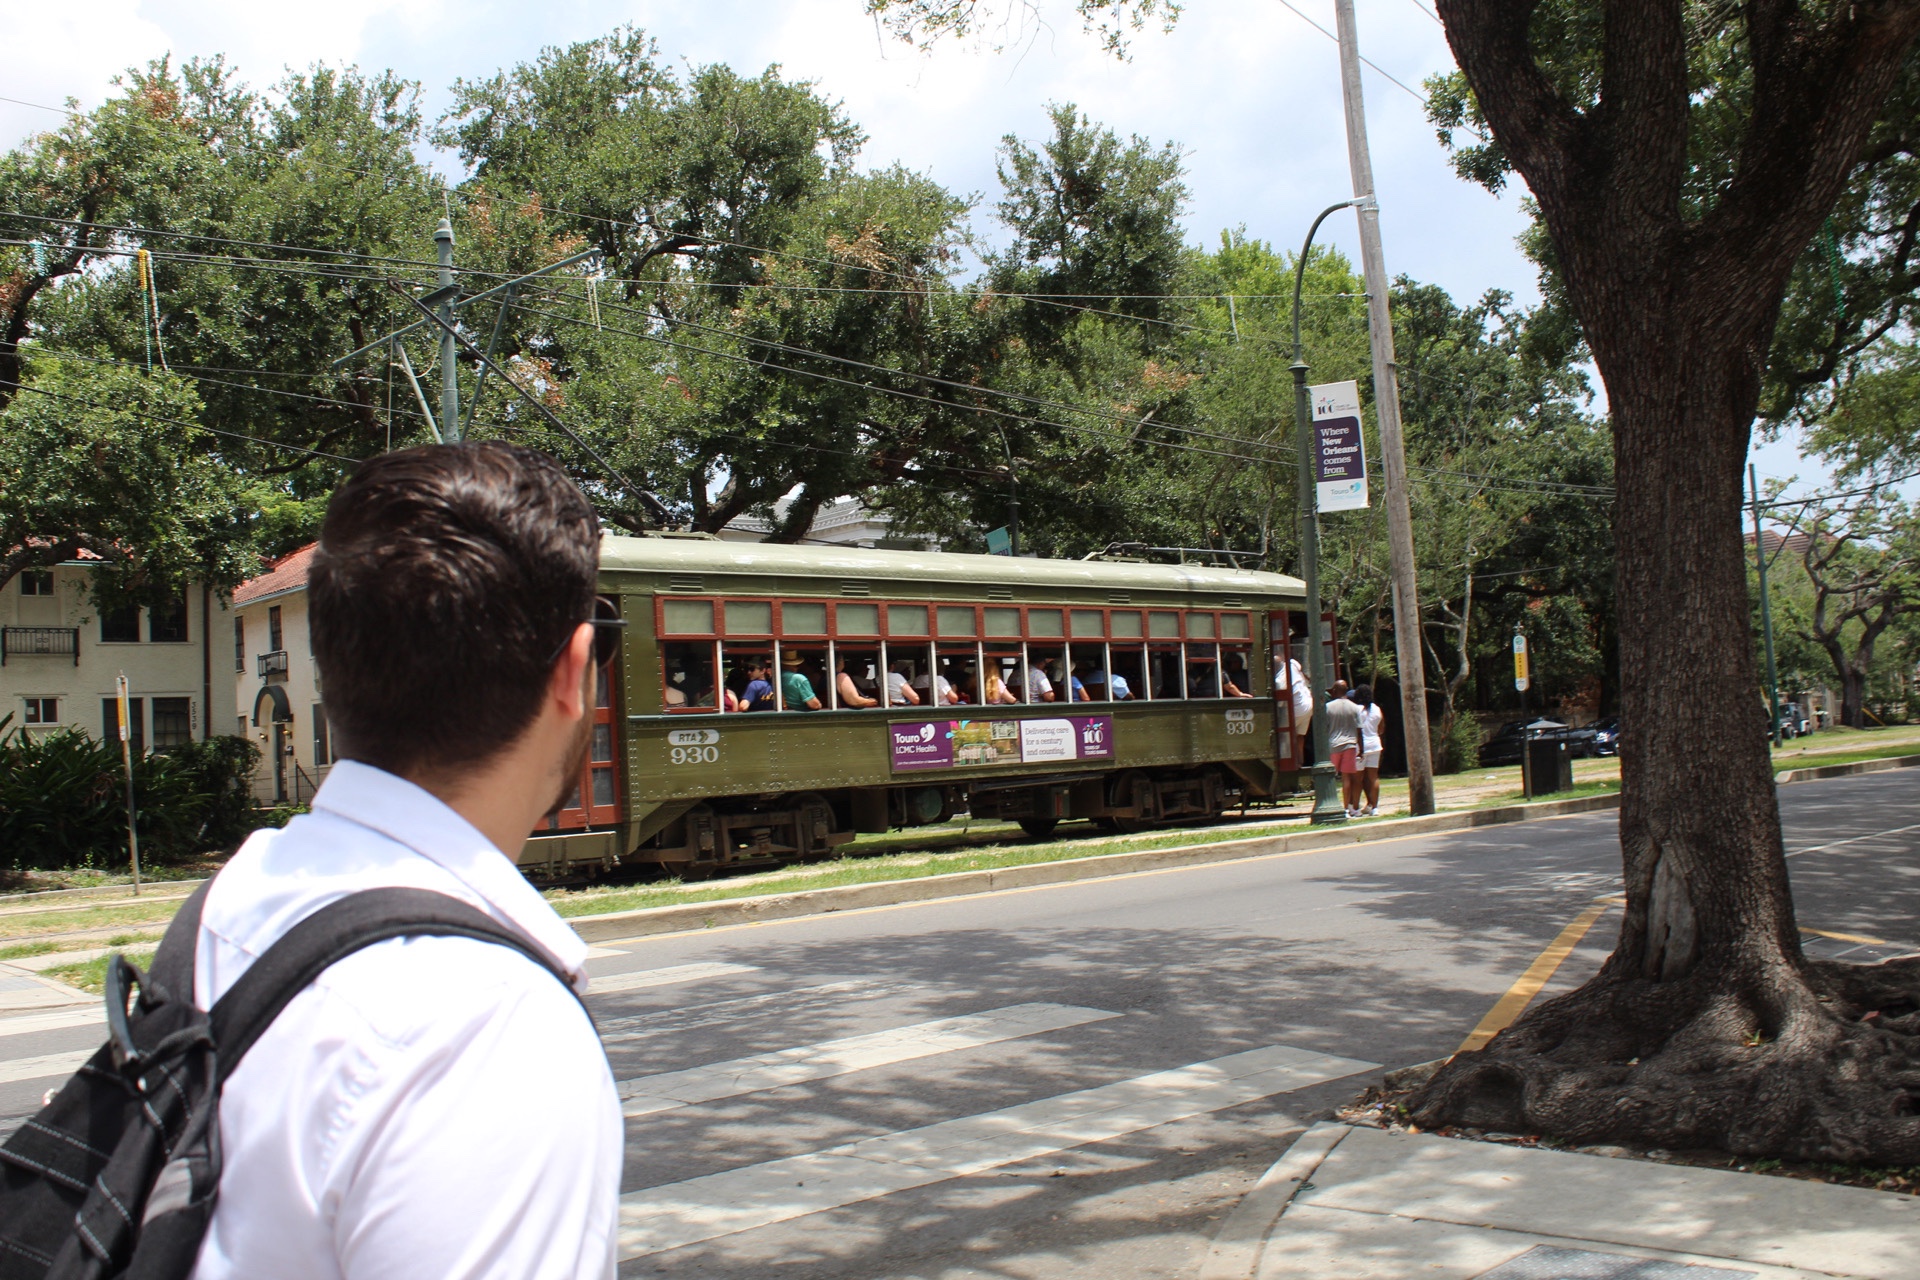 How to get around New Orleans using the Jazzy Pass